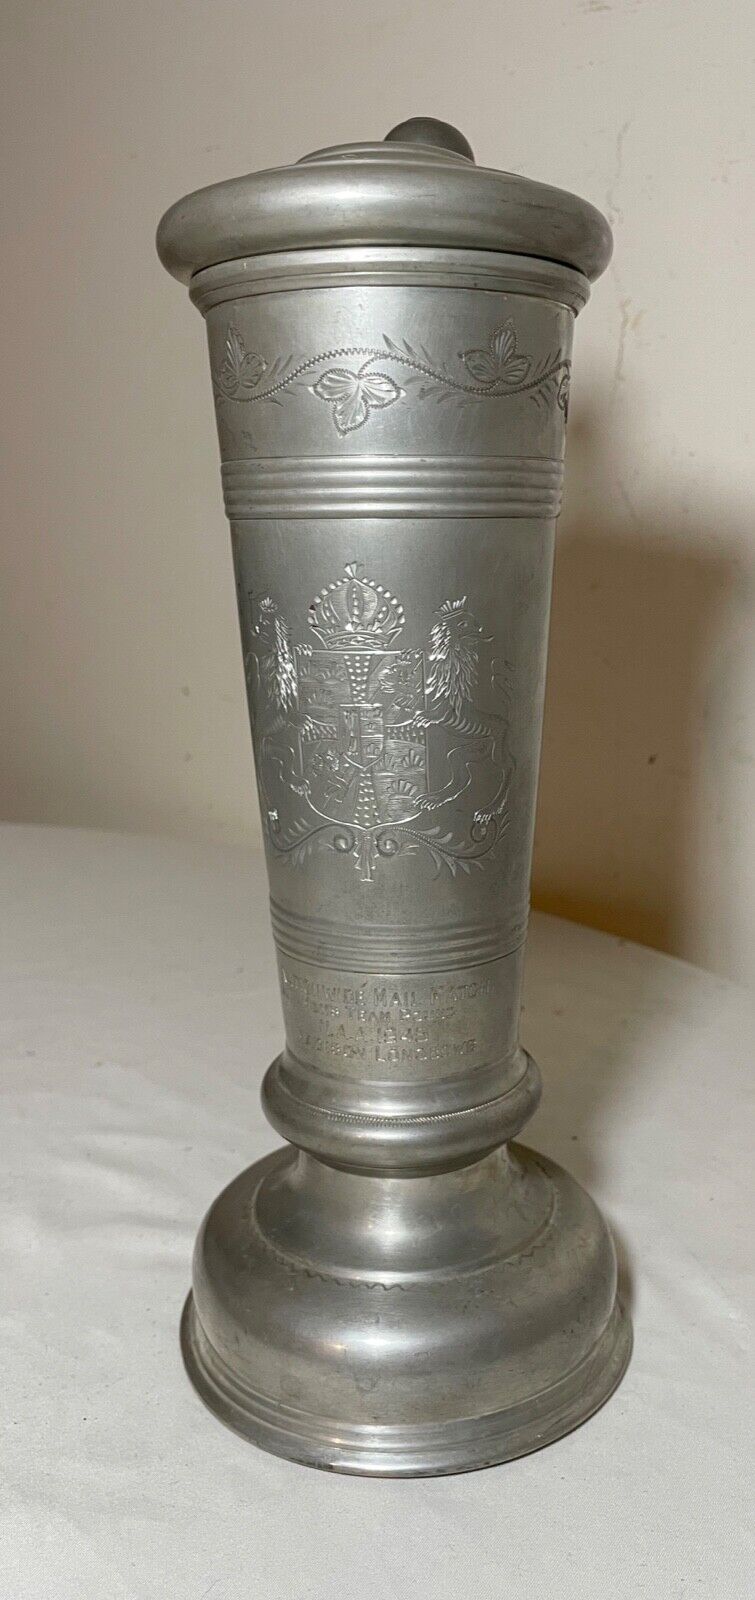 Vintage 45' Beer stein pewter archery longbow hand engraved award trophy pitcher